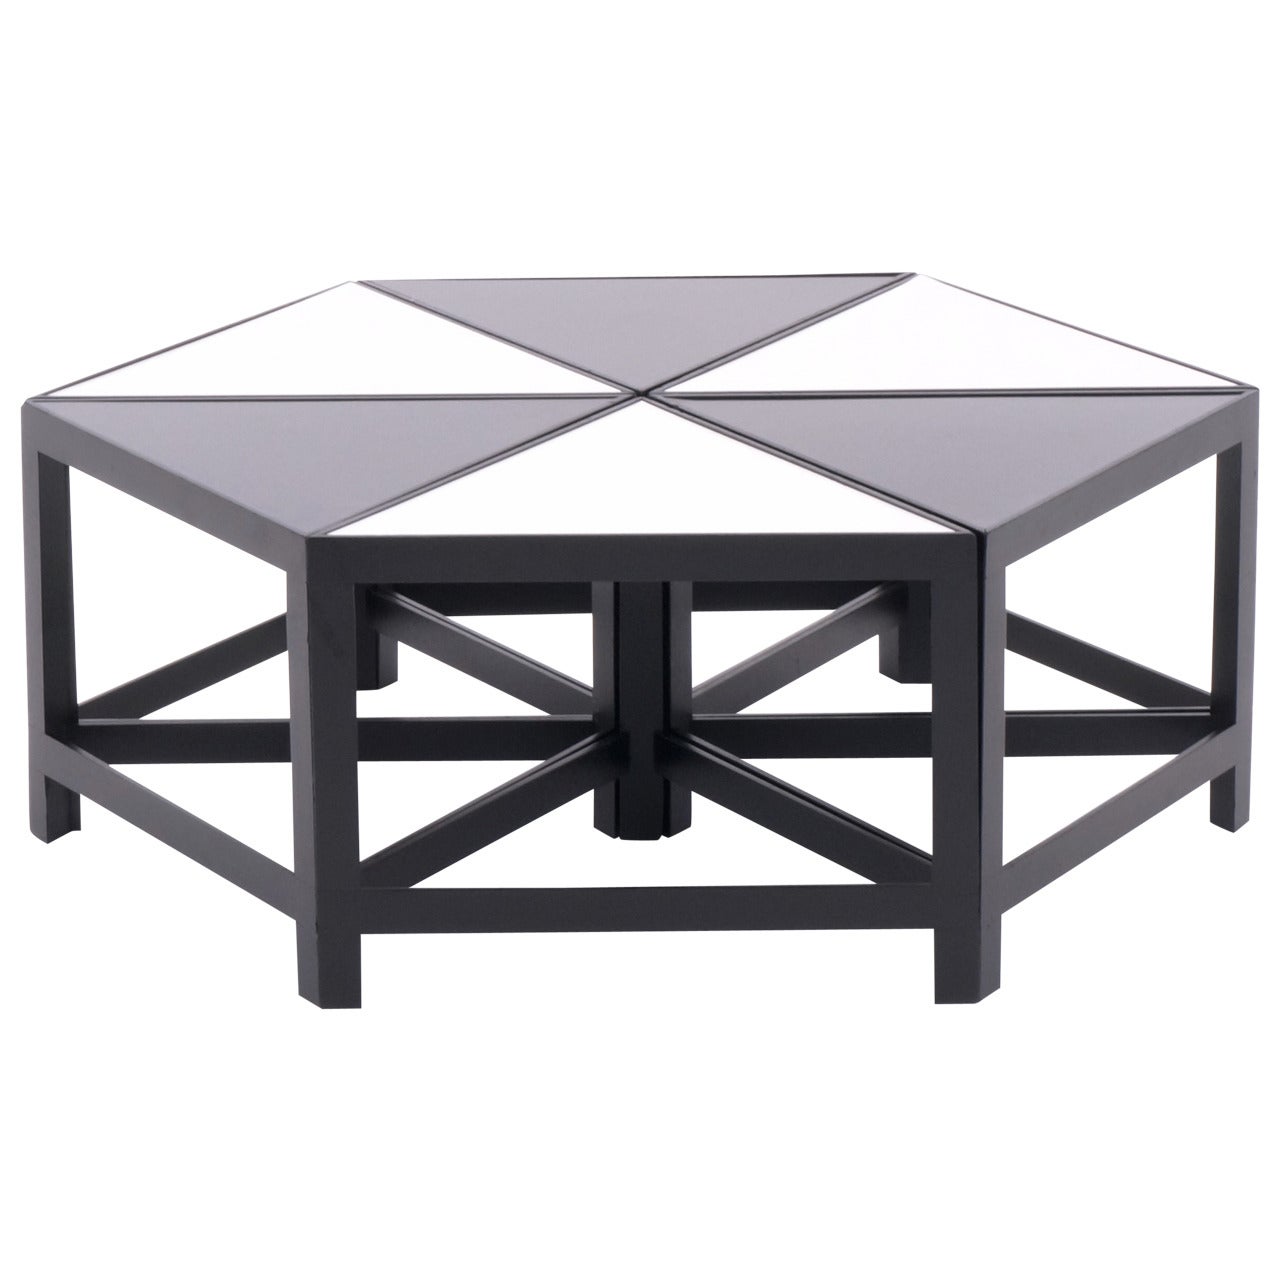 Set of Six Modular Tables For Sale